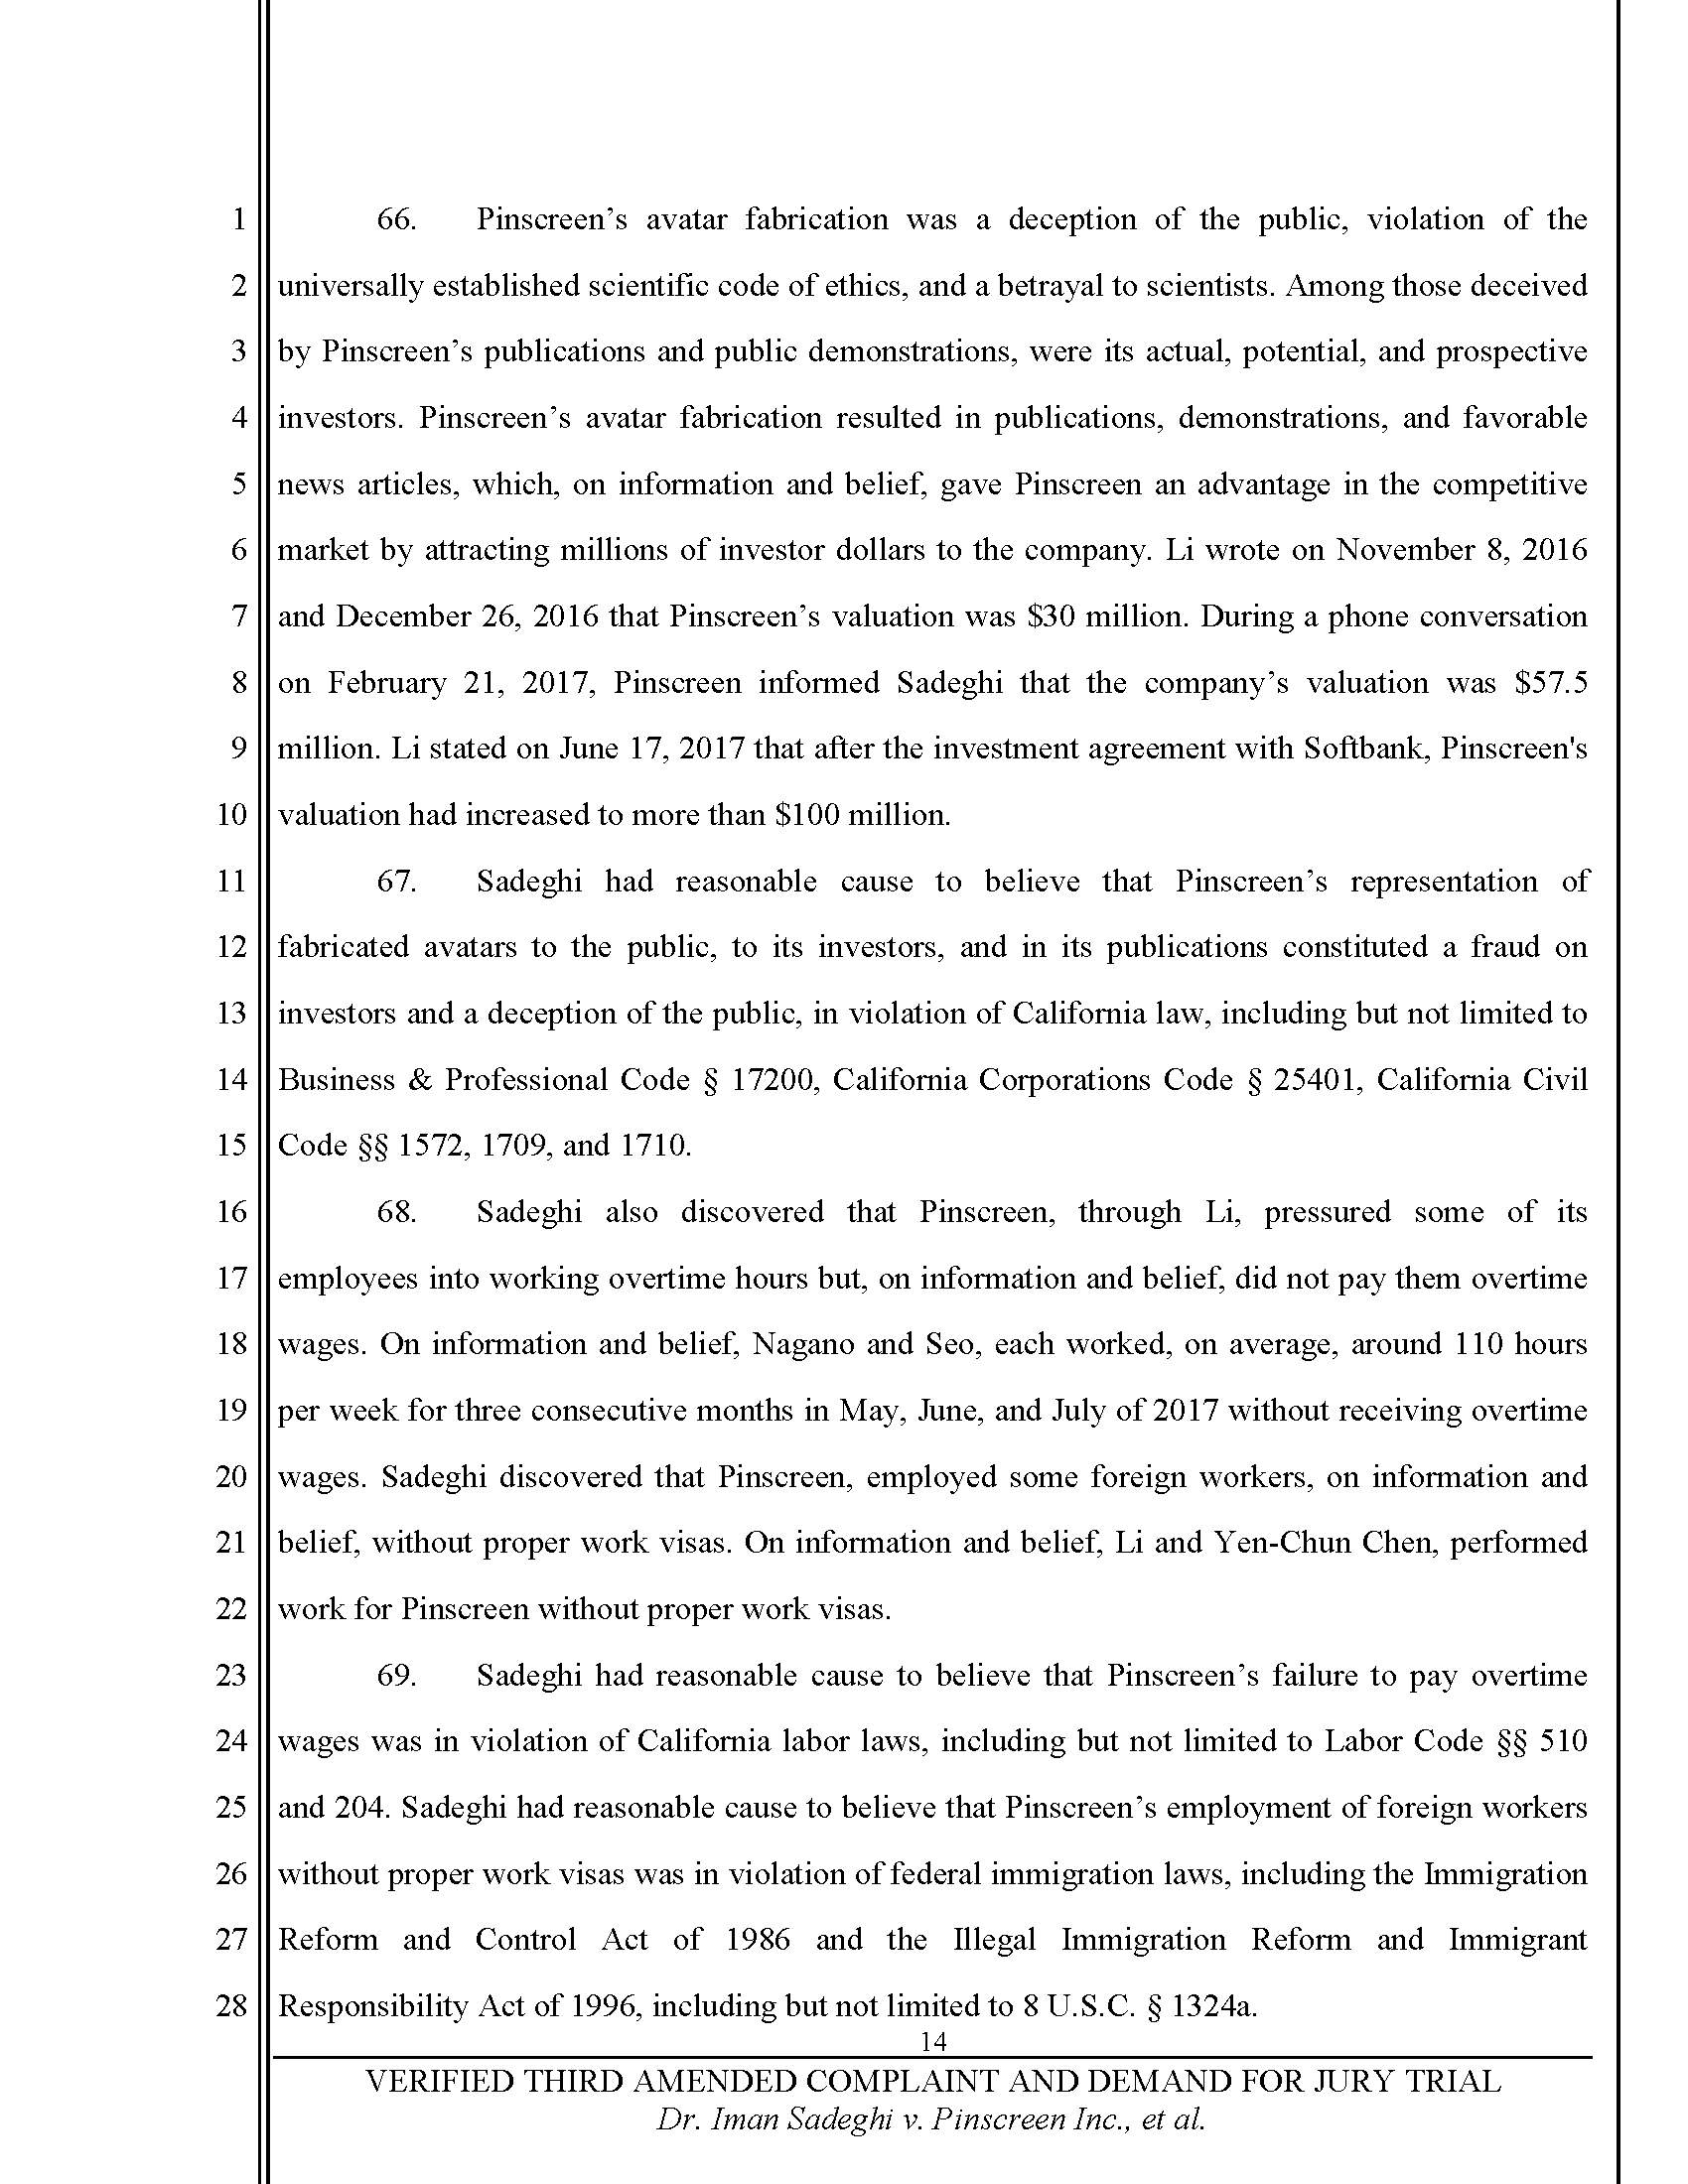 Third Amended Complaint (TAC) Page 15